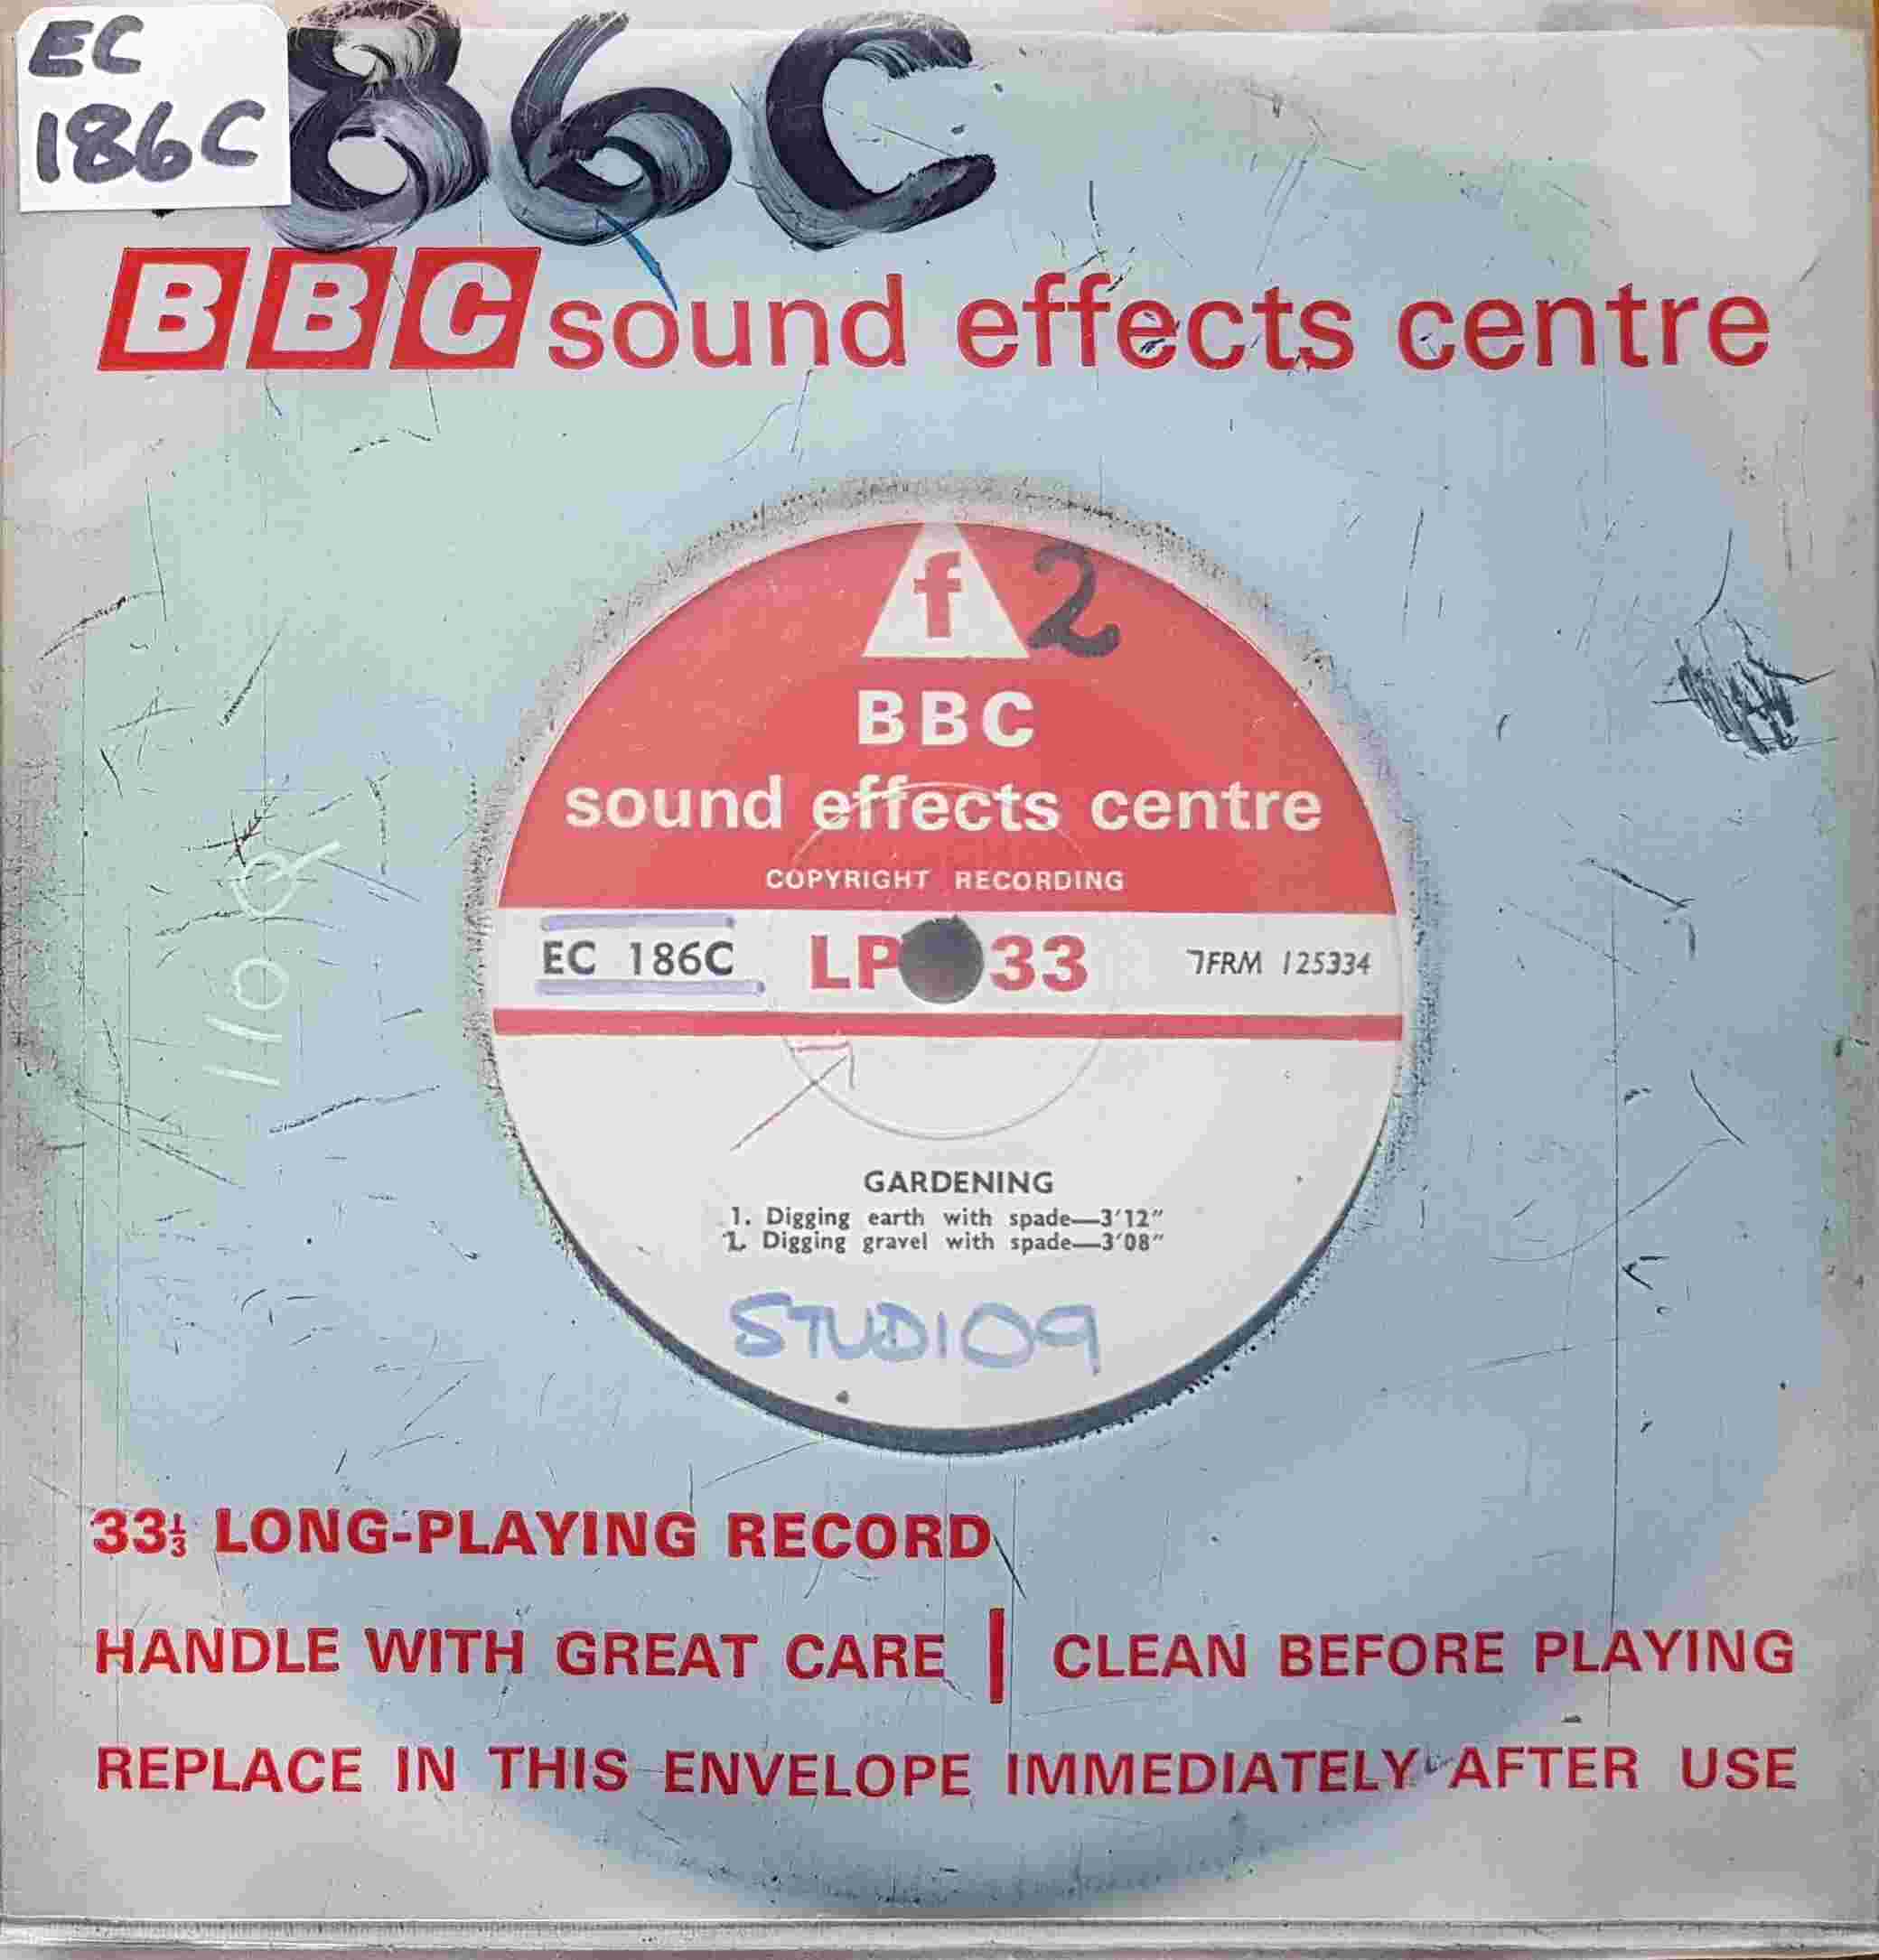 Picture of EC 186C Gardening by artist Not registered from the BBC records and Tapes library